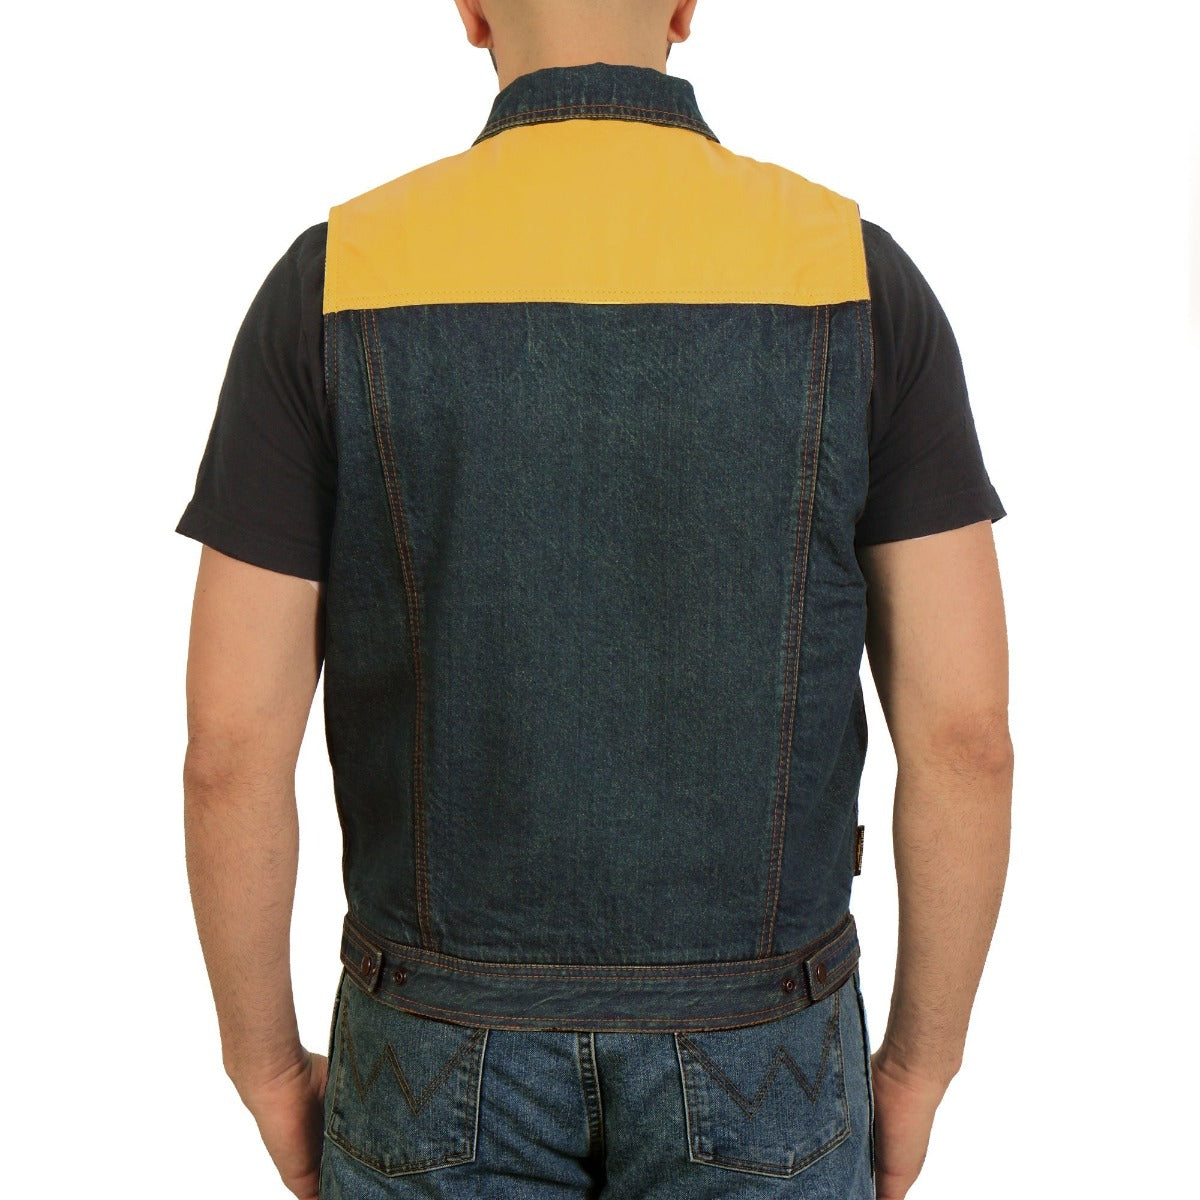 Hot Leathers Men's Leather And Denim Conceal Carry Vest